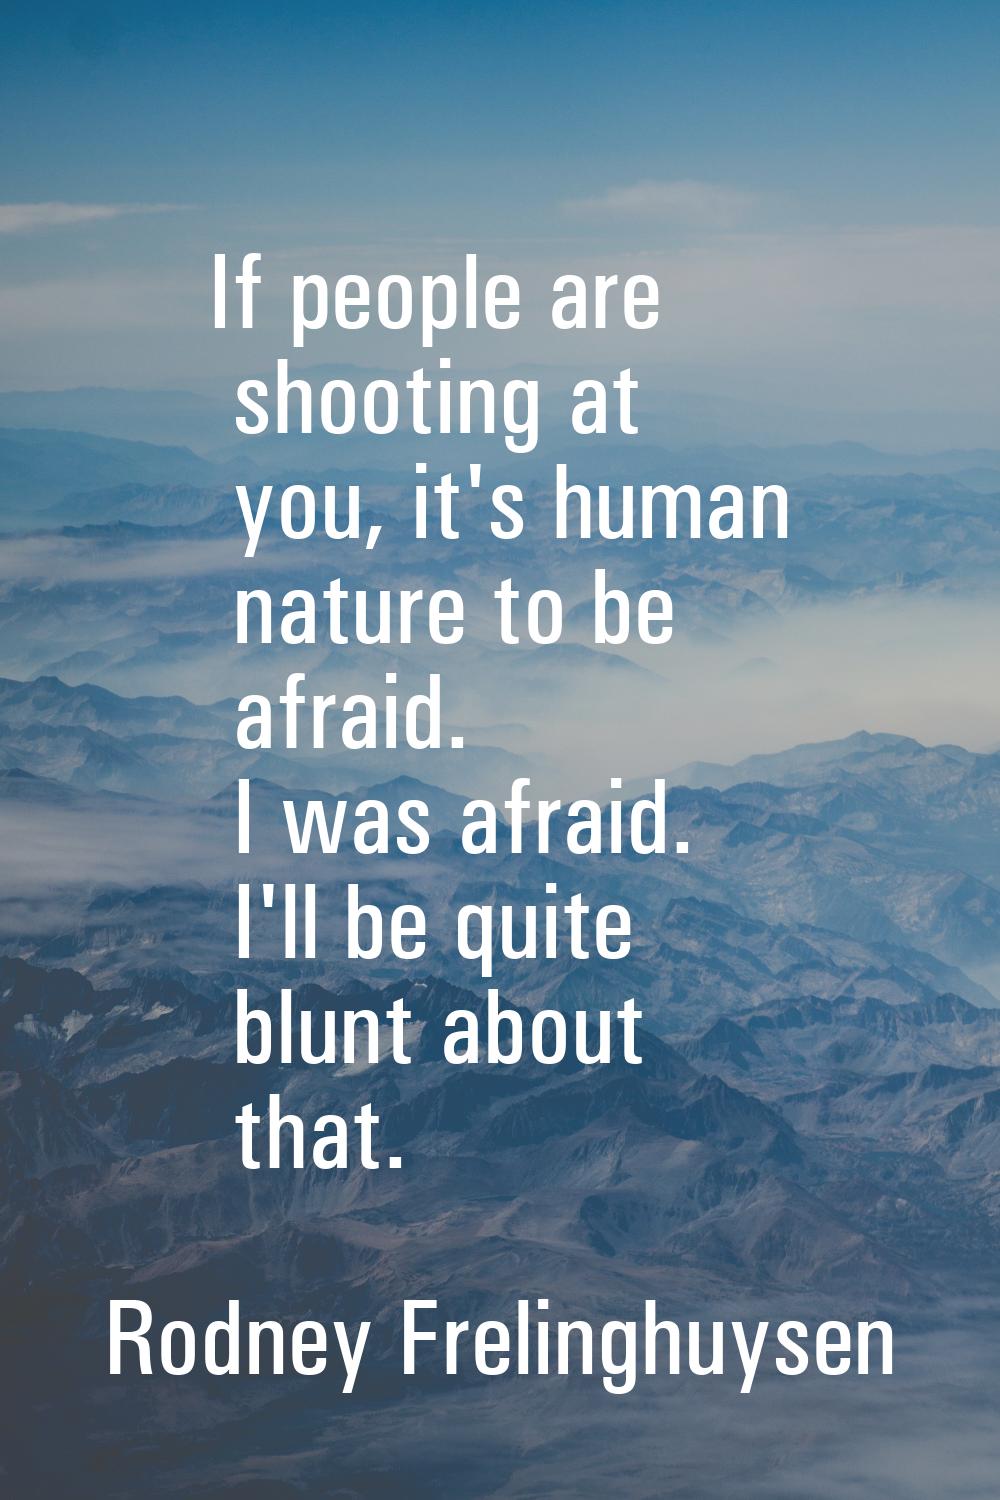 If people are shooting at you, it's human nature to be afraid. I was afraid. I'll be quite blunt ab